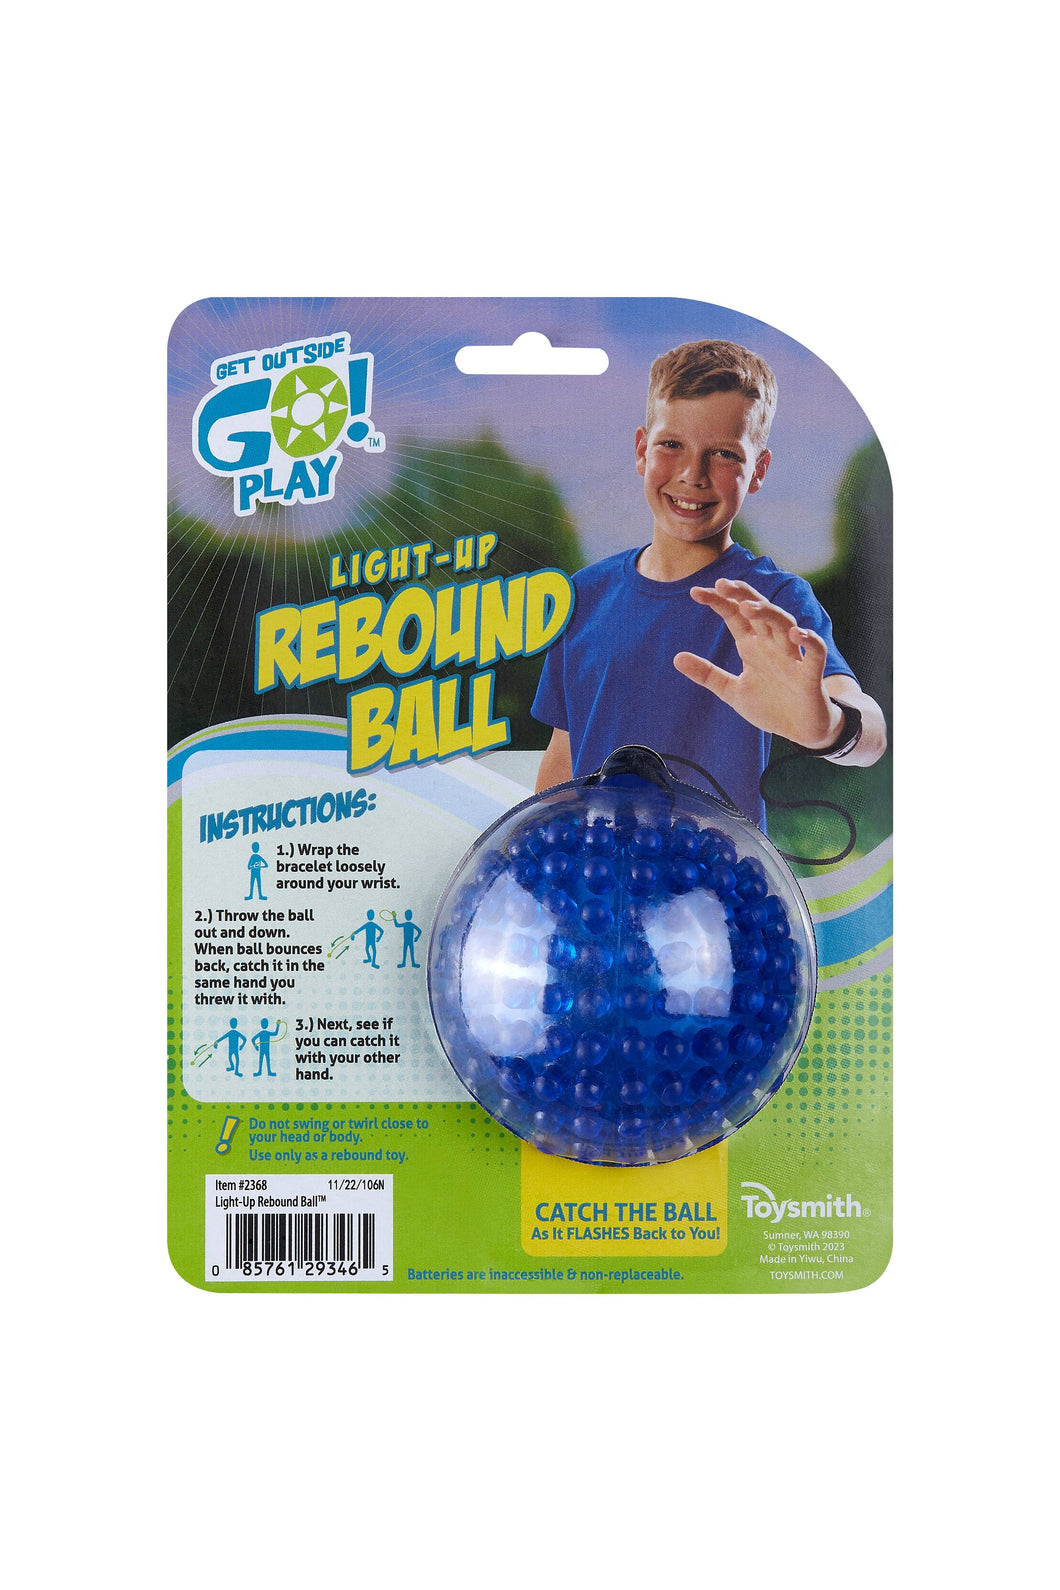 Get Outside GO!™ Play Light-Up Rebound Ball